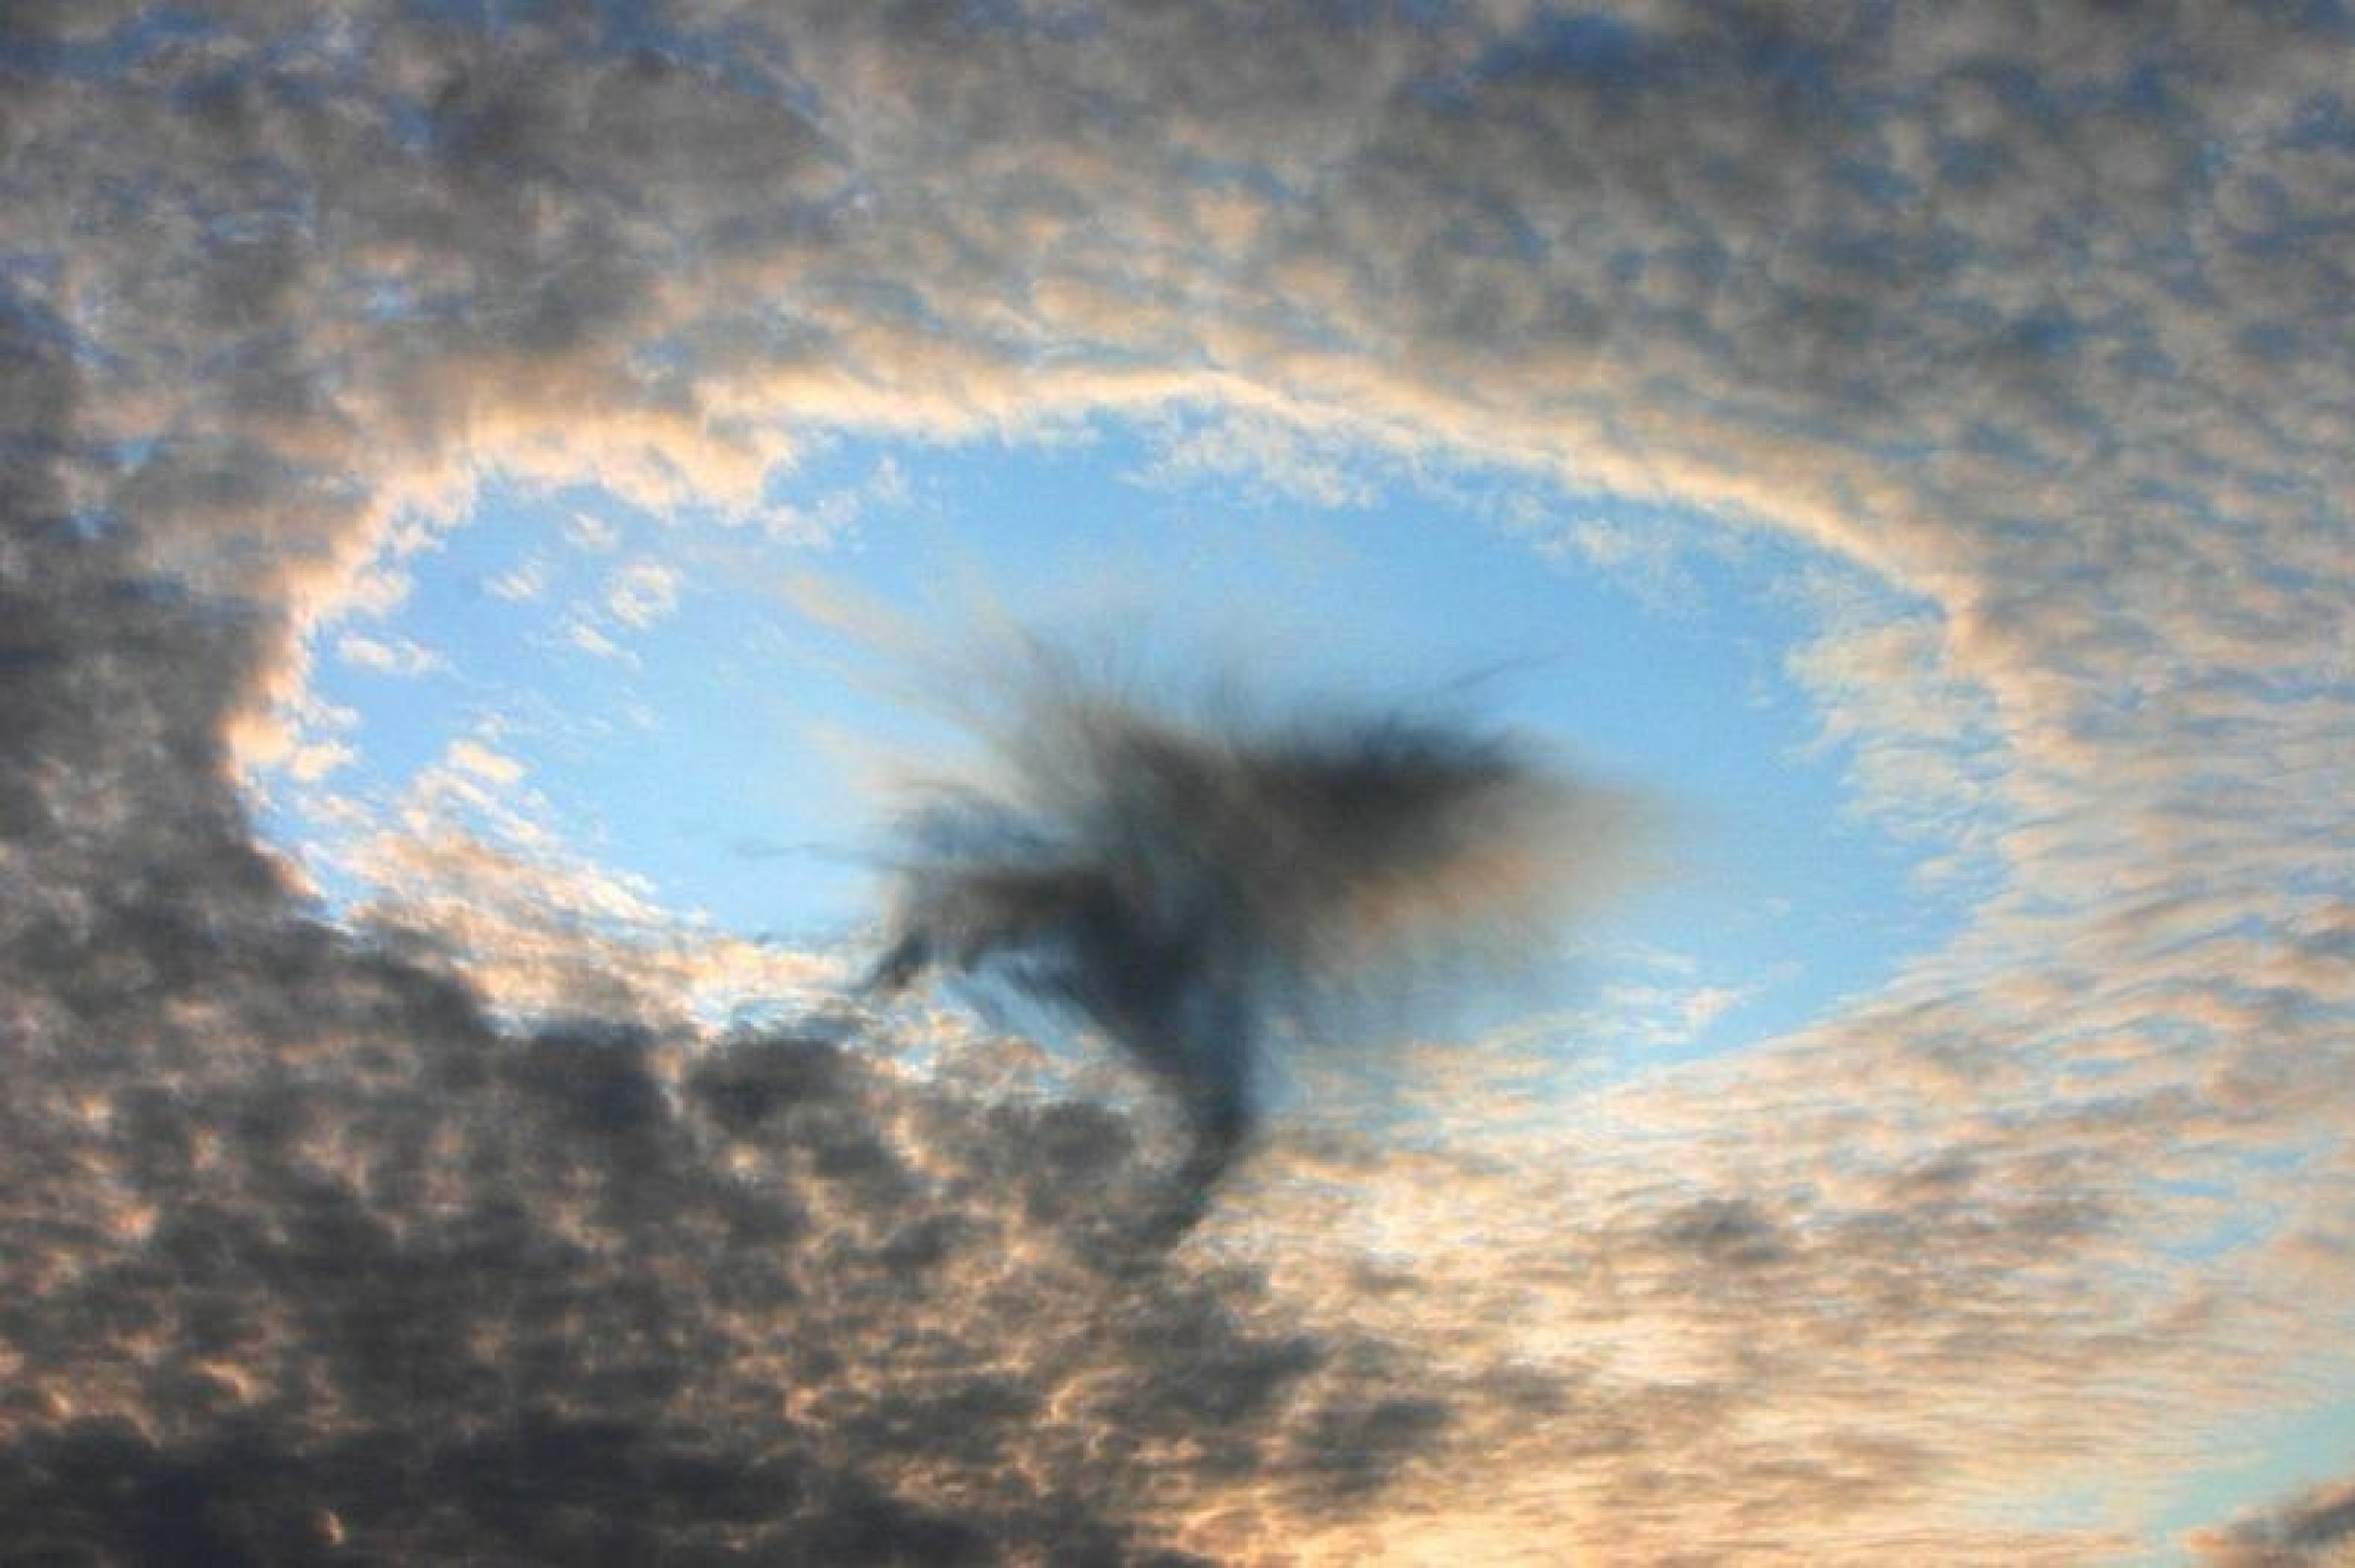 NASA releases spectacular images of mysterious 039Hole Punch039 clouds.